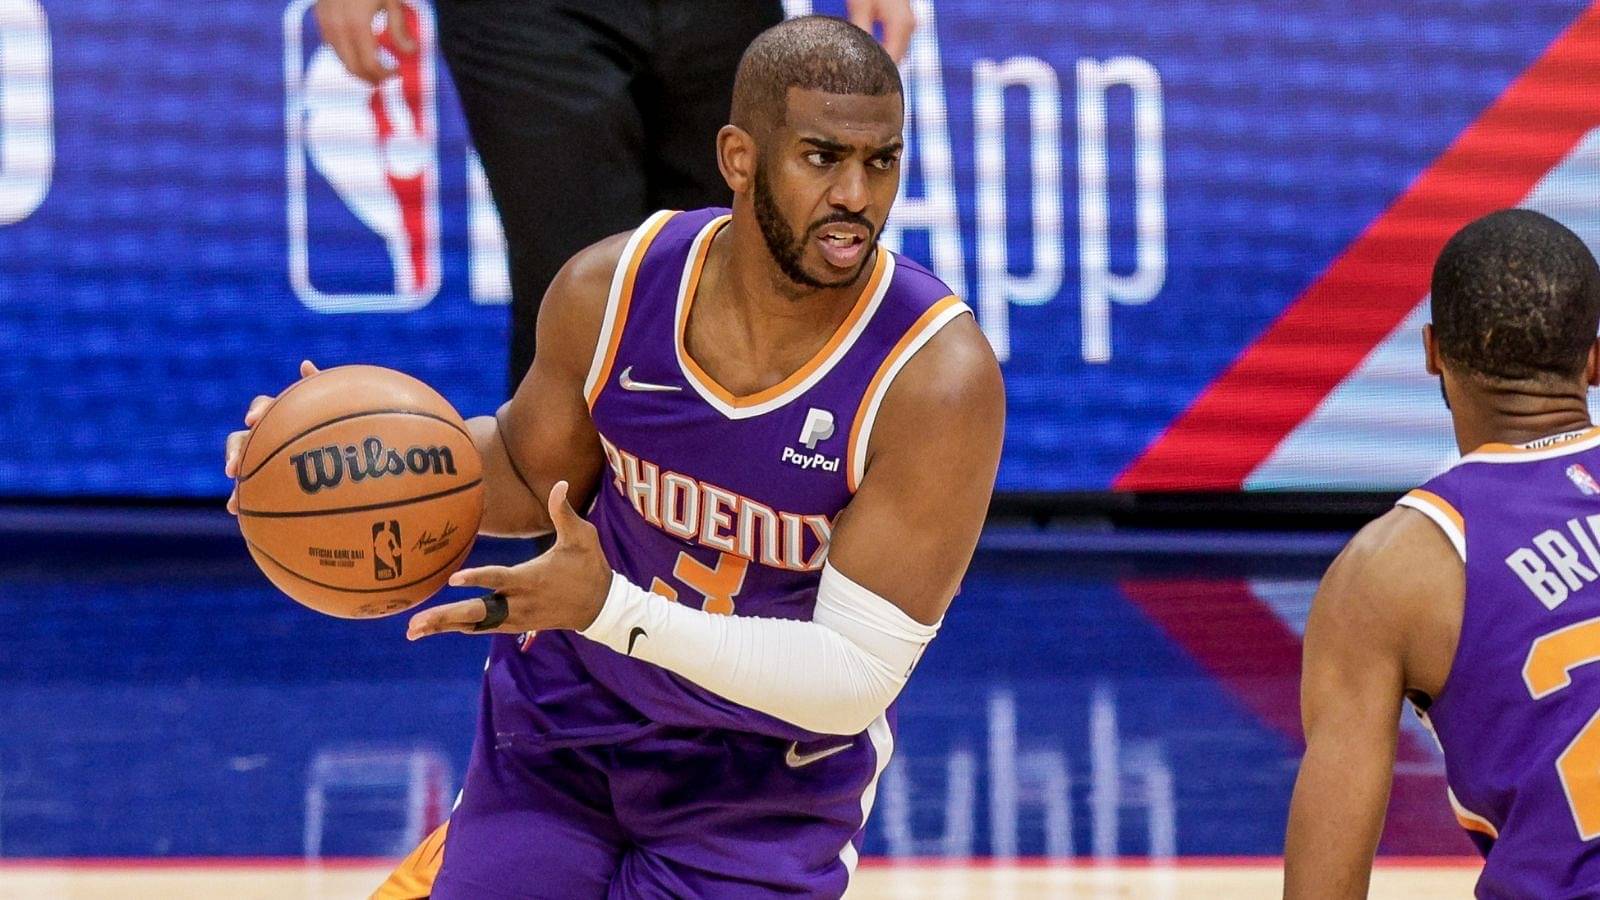 Why Chris Paul Keeps Writing “Can't Give Up Now” on His Sneakers - Boardroom  